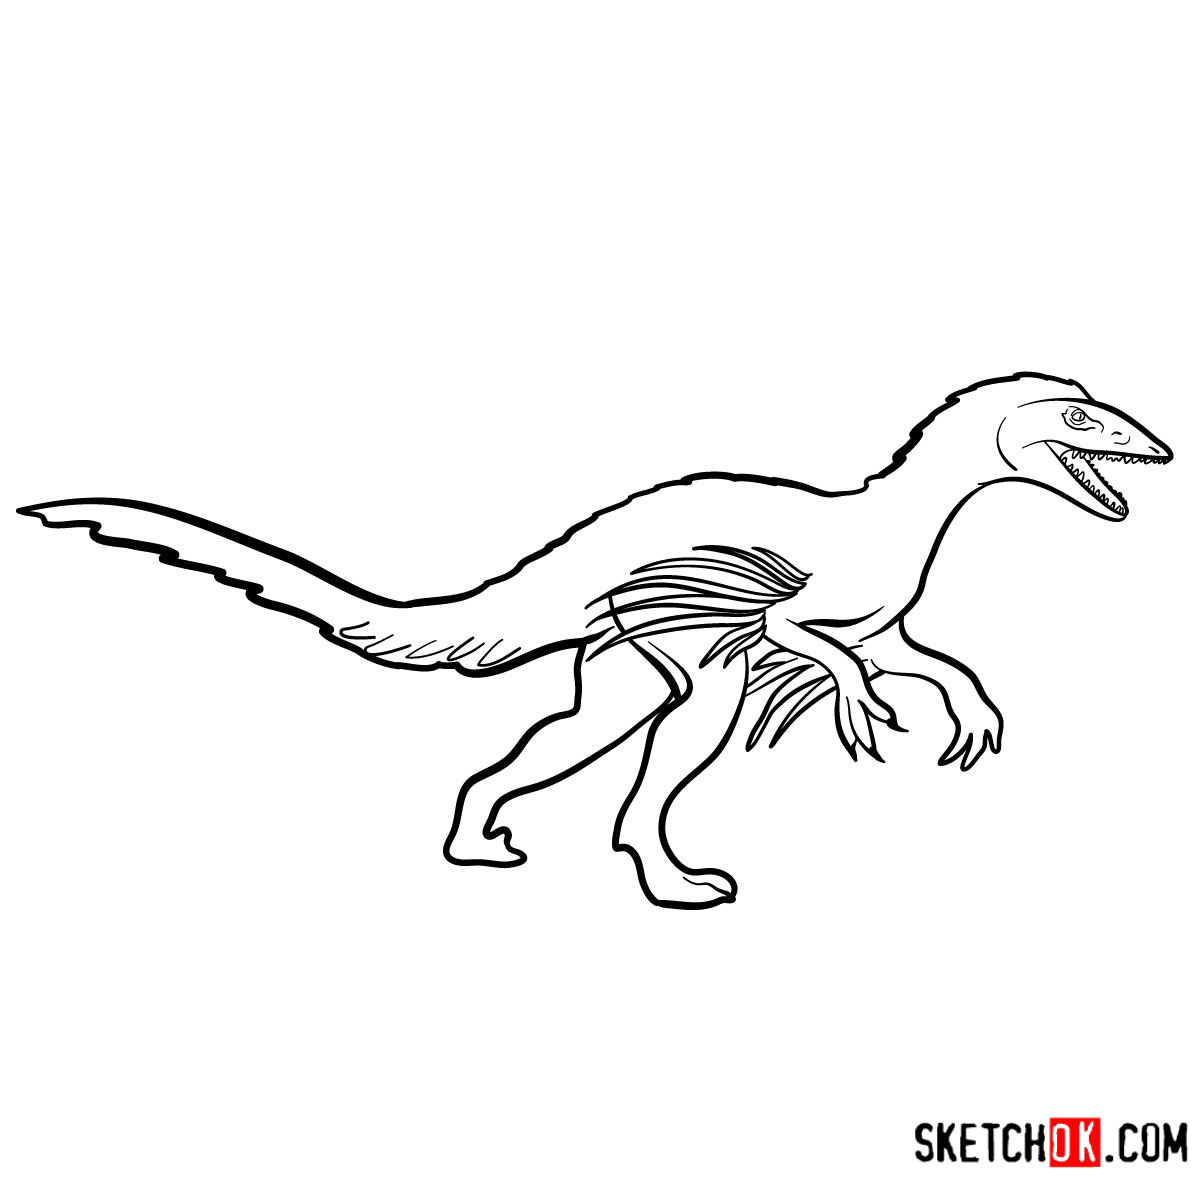 How to draw a Troodon